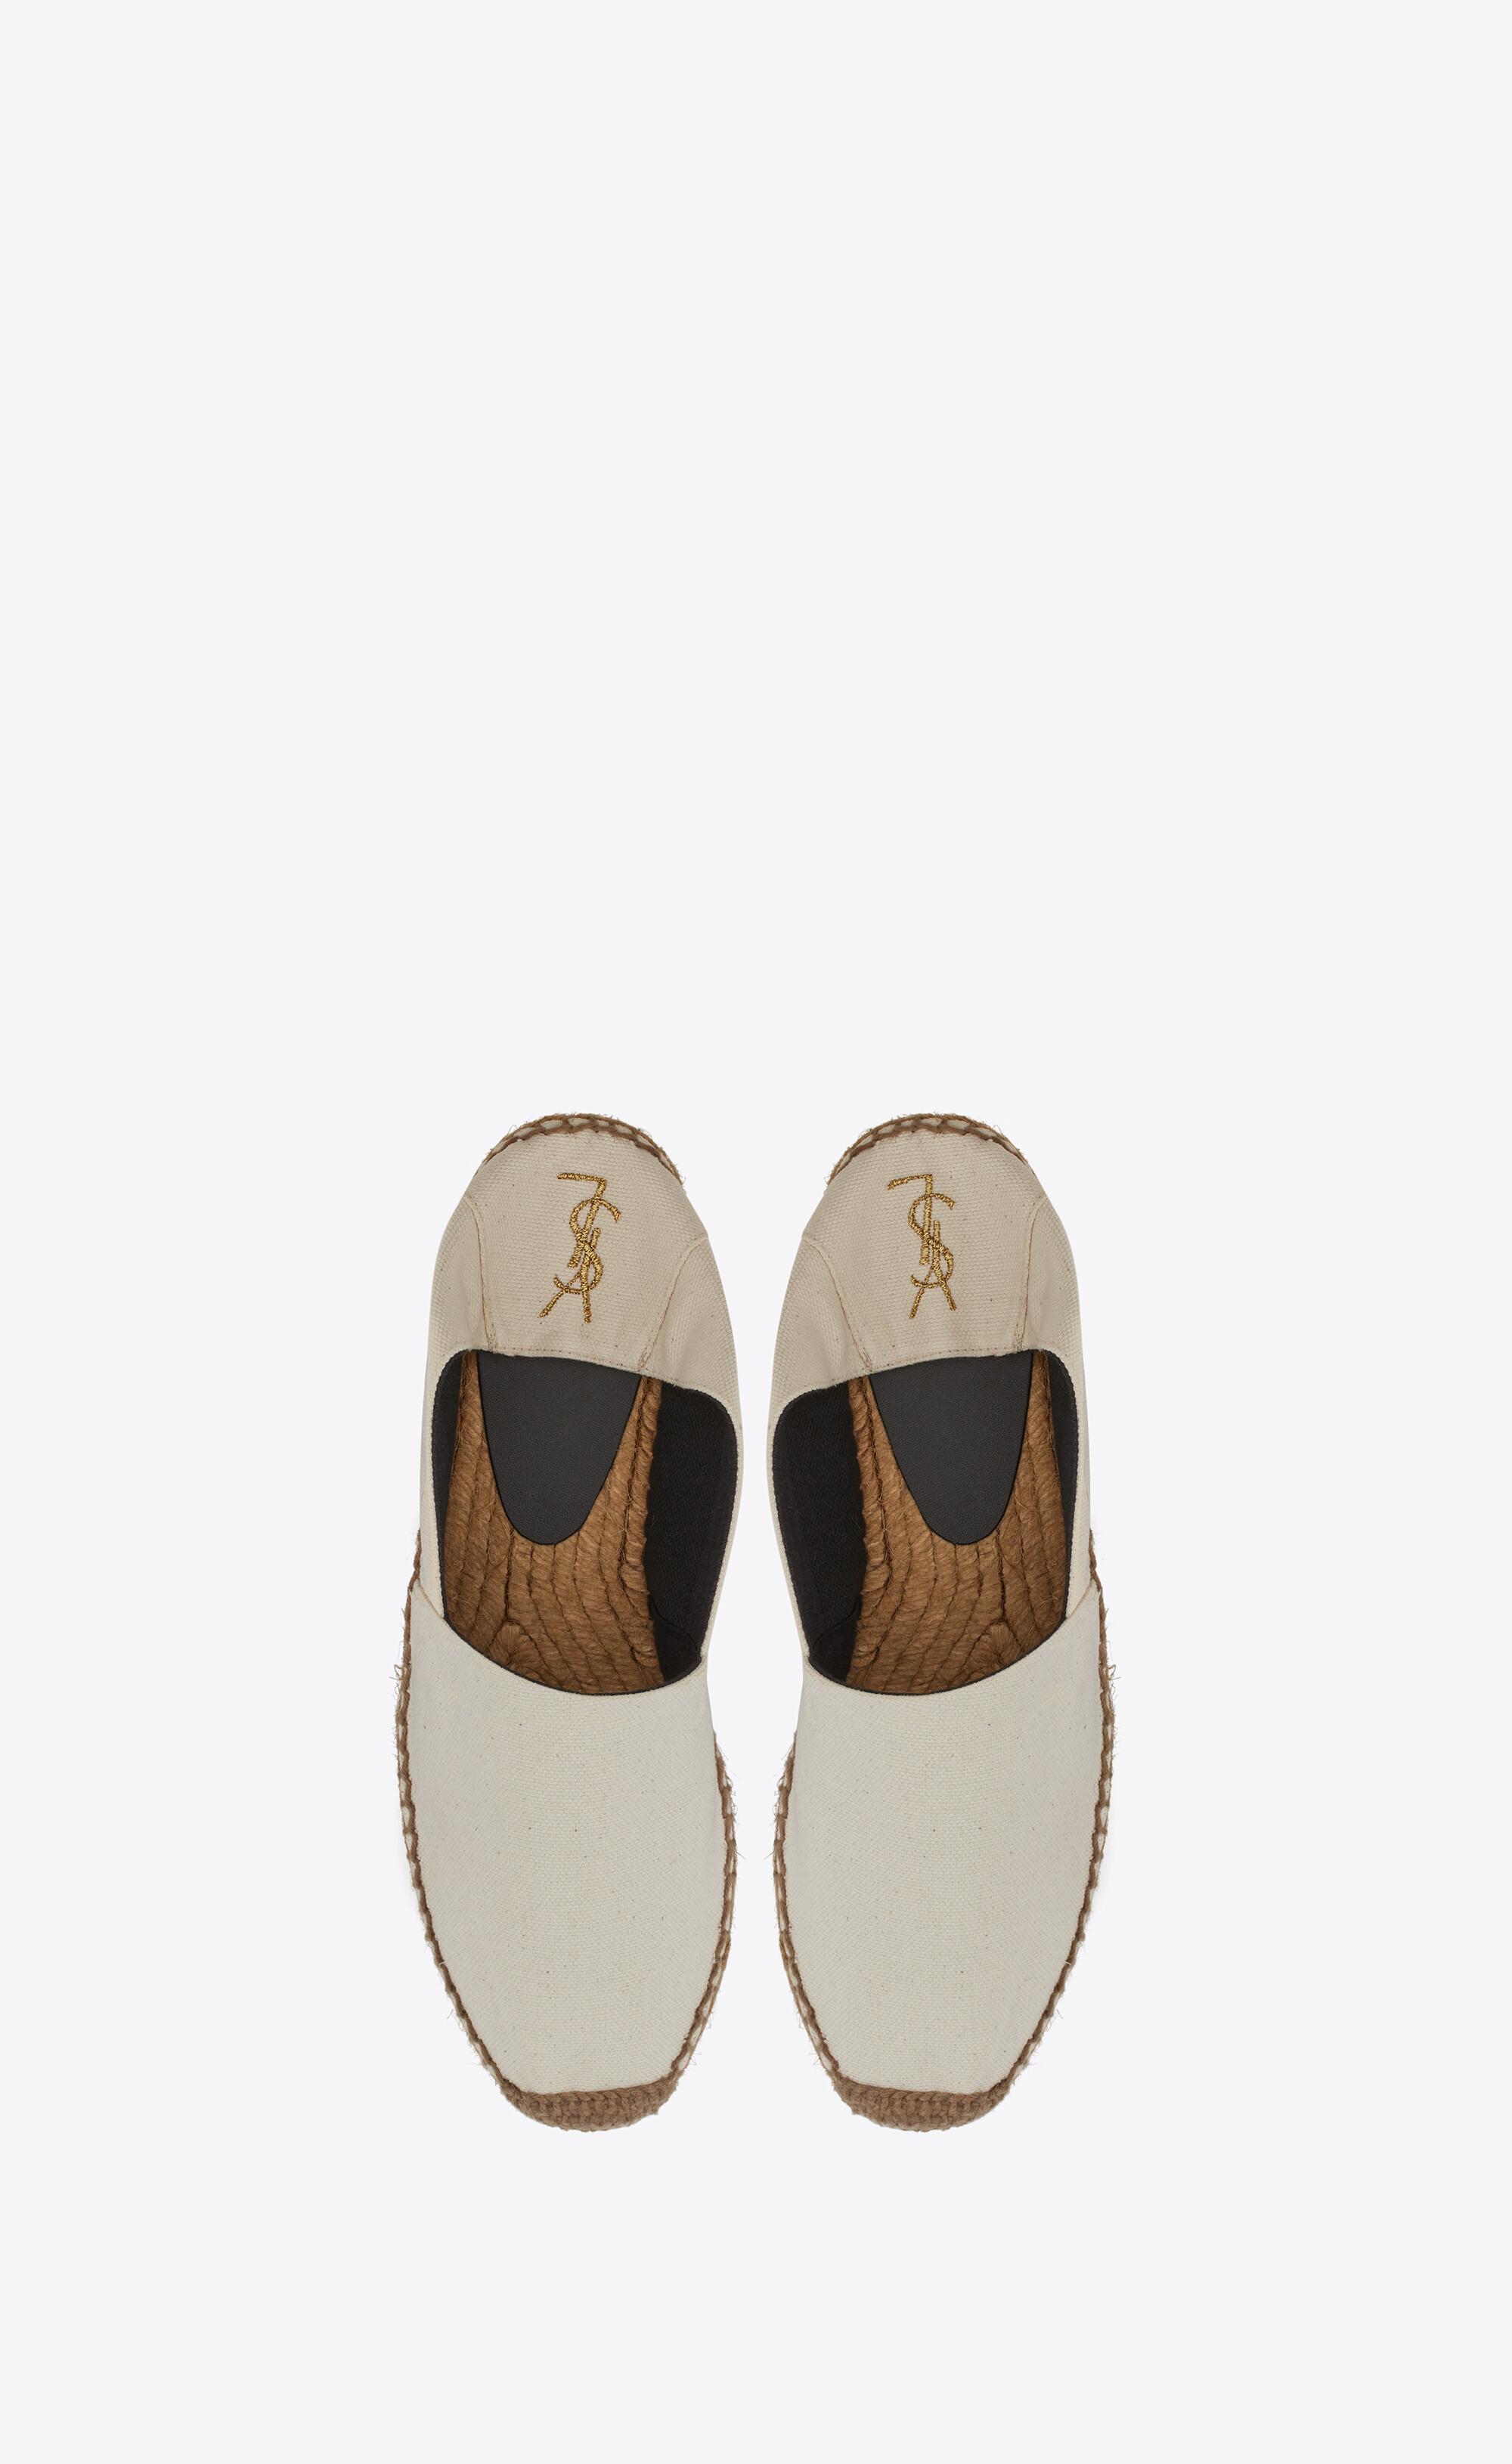 Womens Shoes Flats and flat shoes Espadrille shoes and sandals Saint Laurent Embroidered Logo Black Espadrillas 